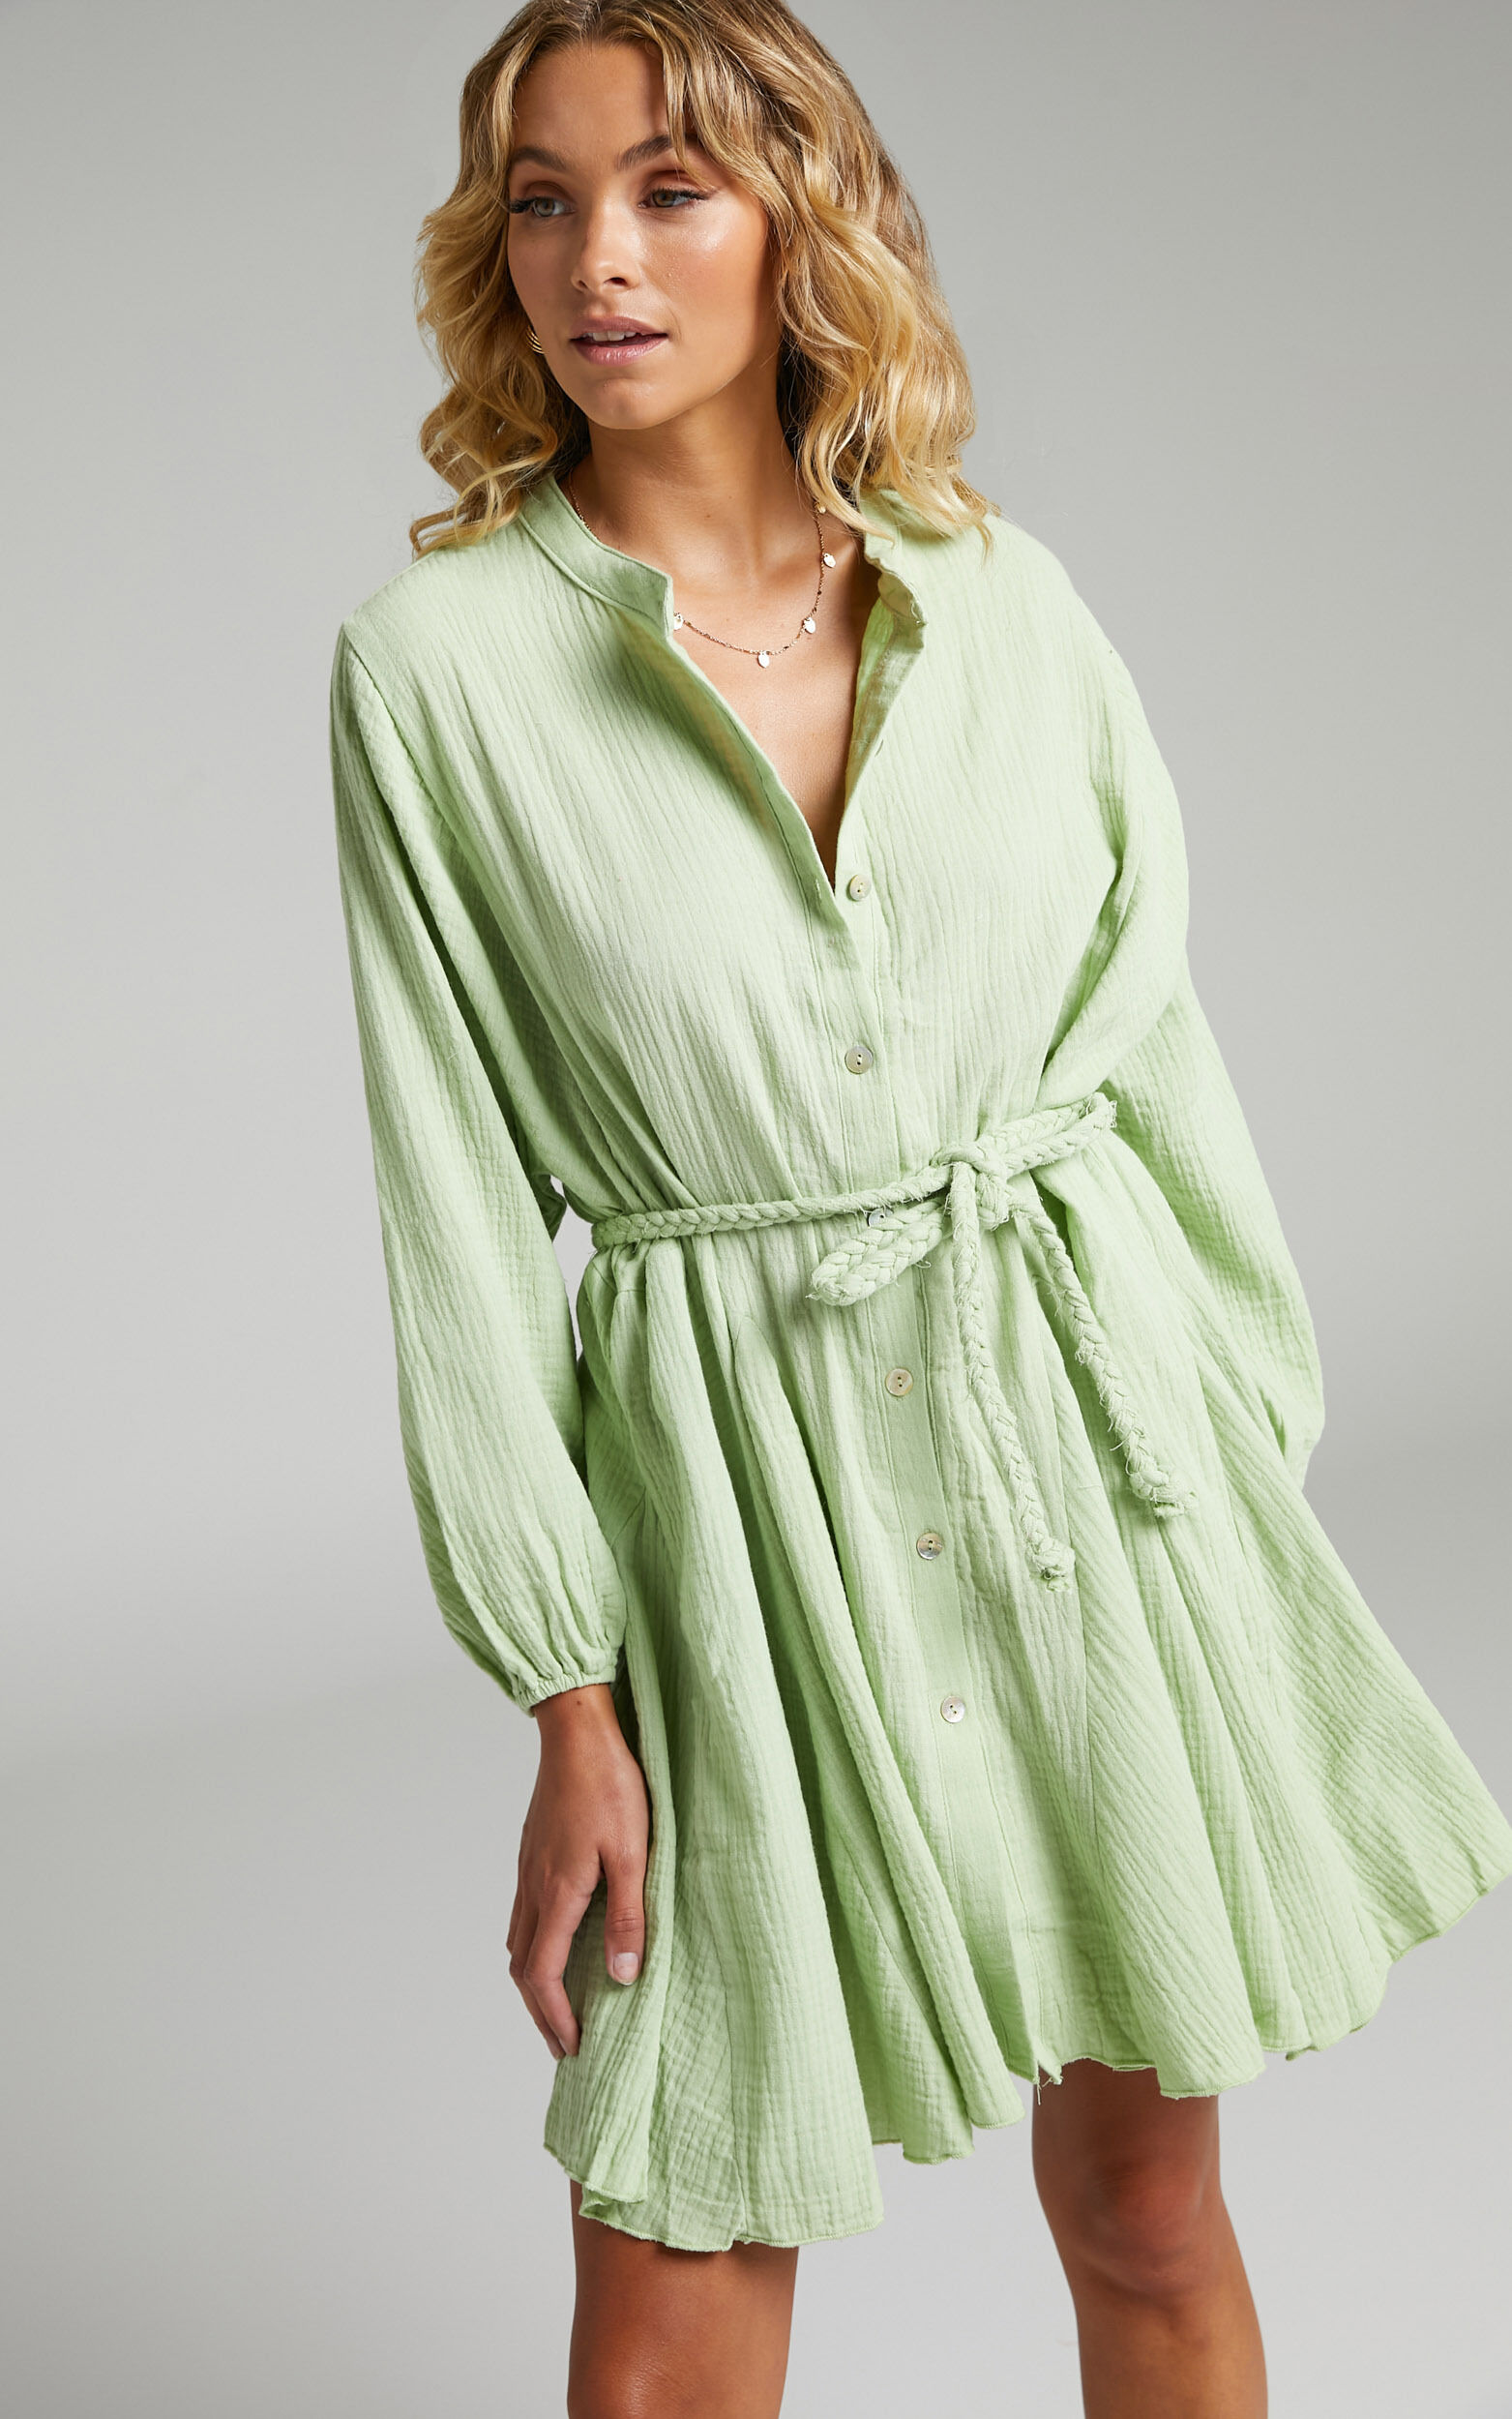 Raphaelle Long Sleeve Button Up Mini Dress in Green - 04, GRN2, super-hi-res image number null